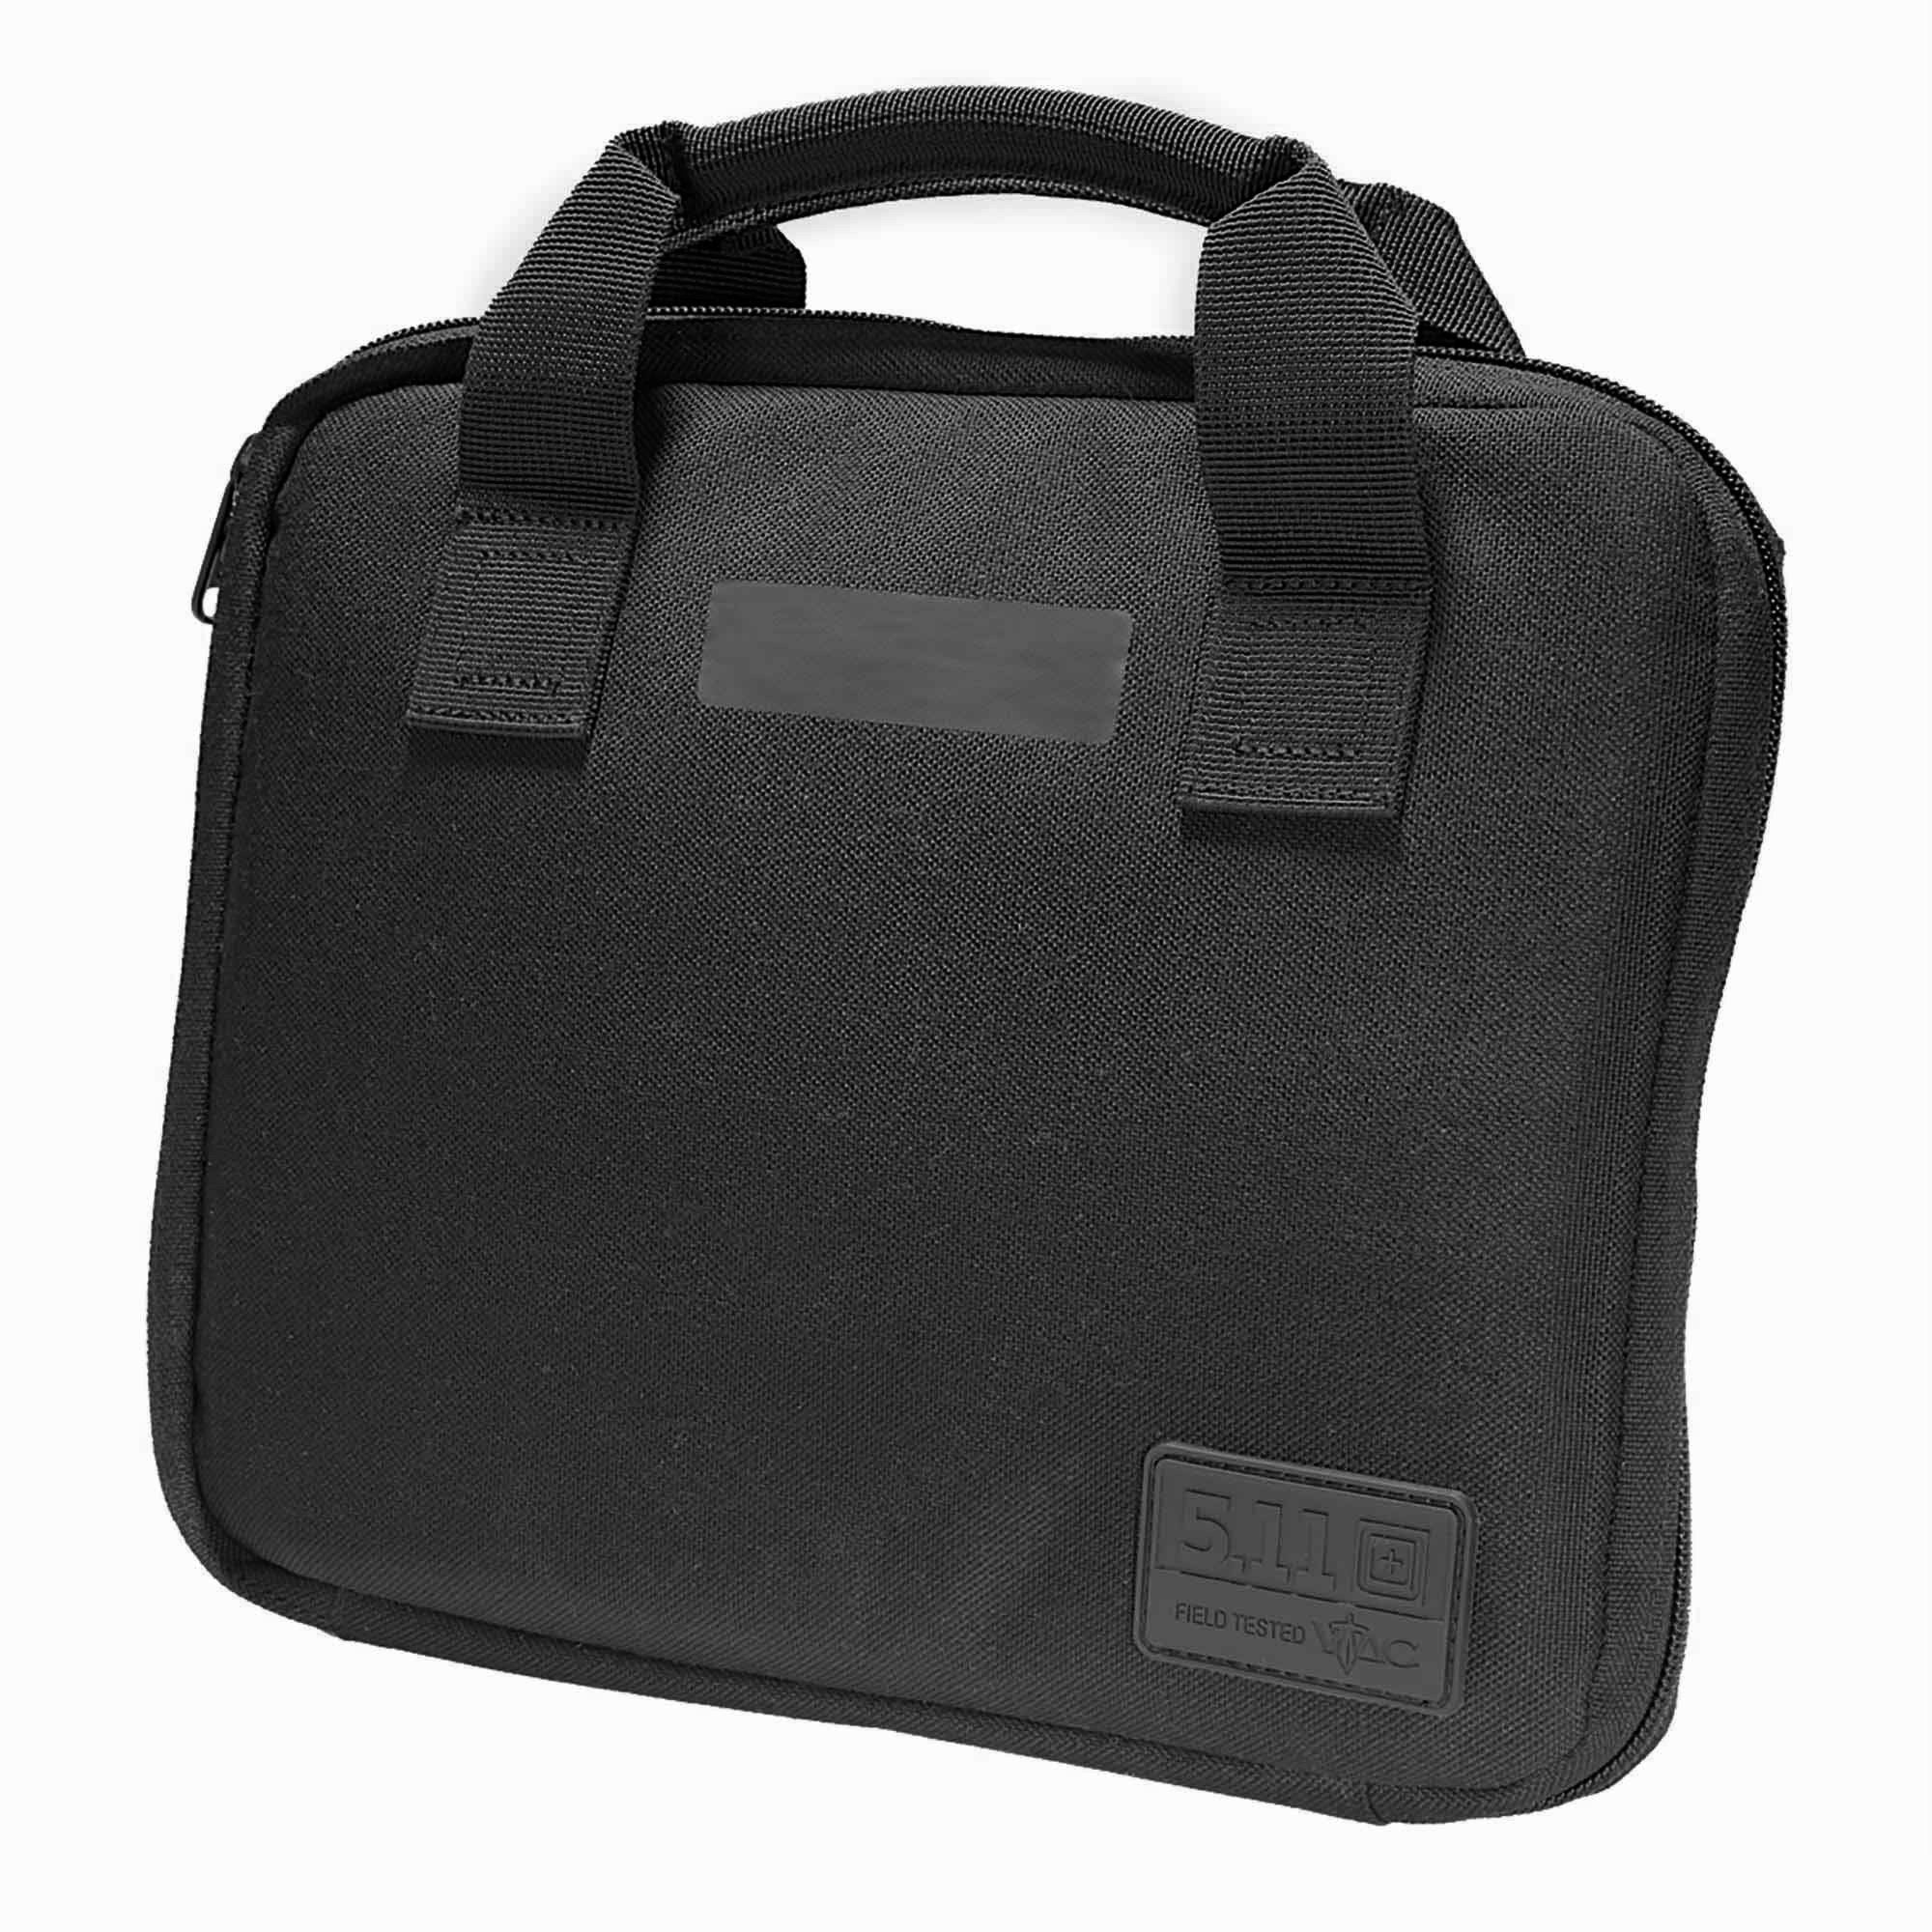 5.11 Tactical Single Pistol Case Bags, Packs and Cases 5.11 Tactical Tactical Gear Supplier Tactical Distributors Australia